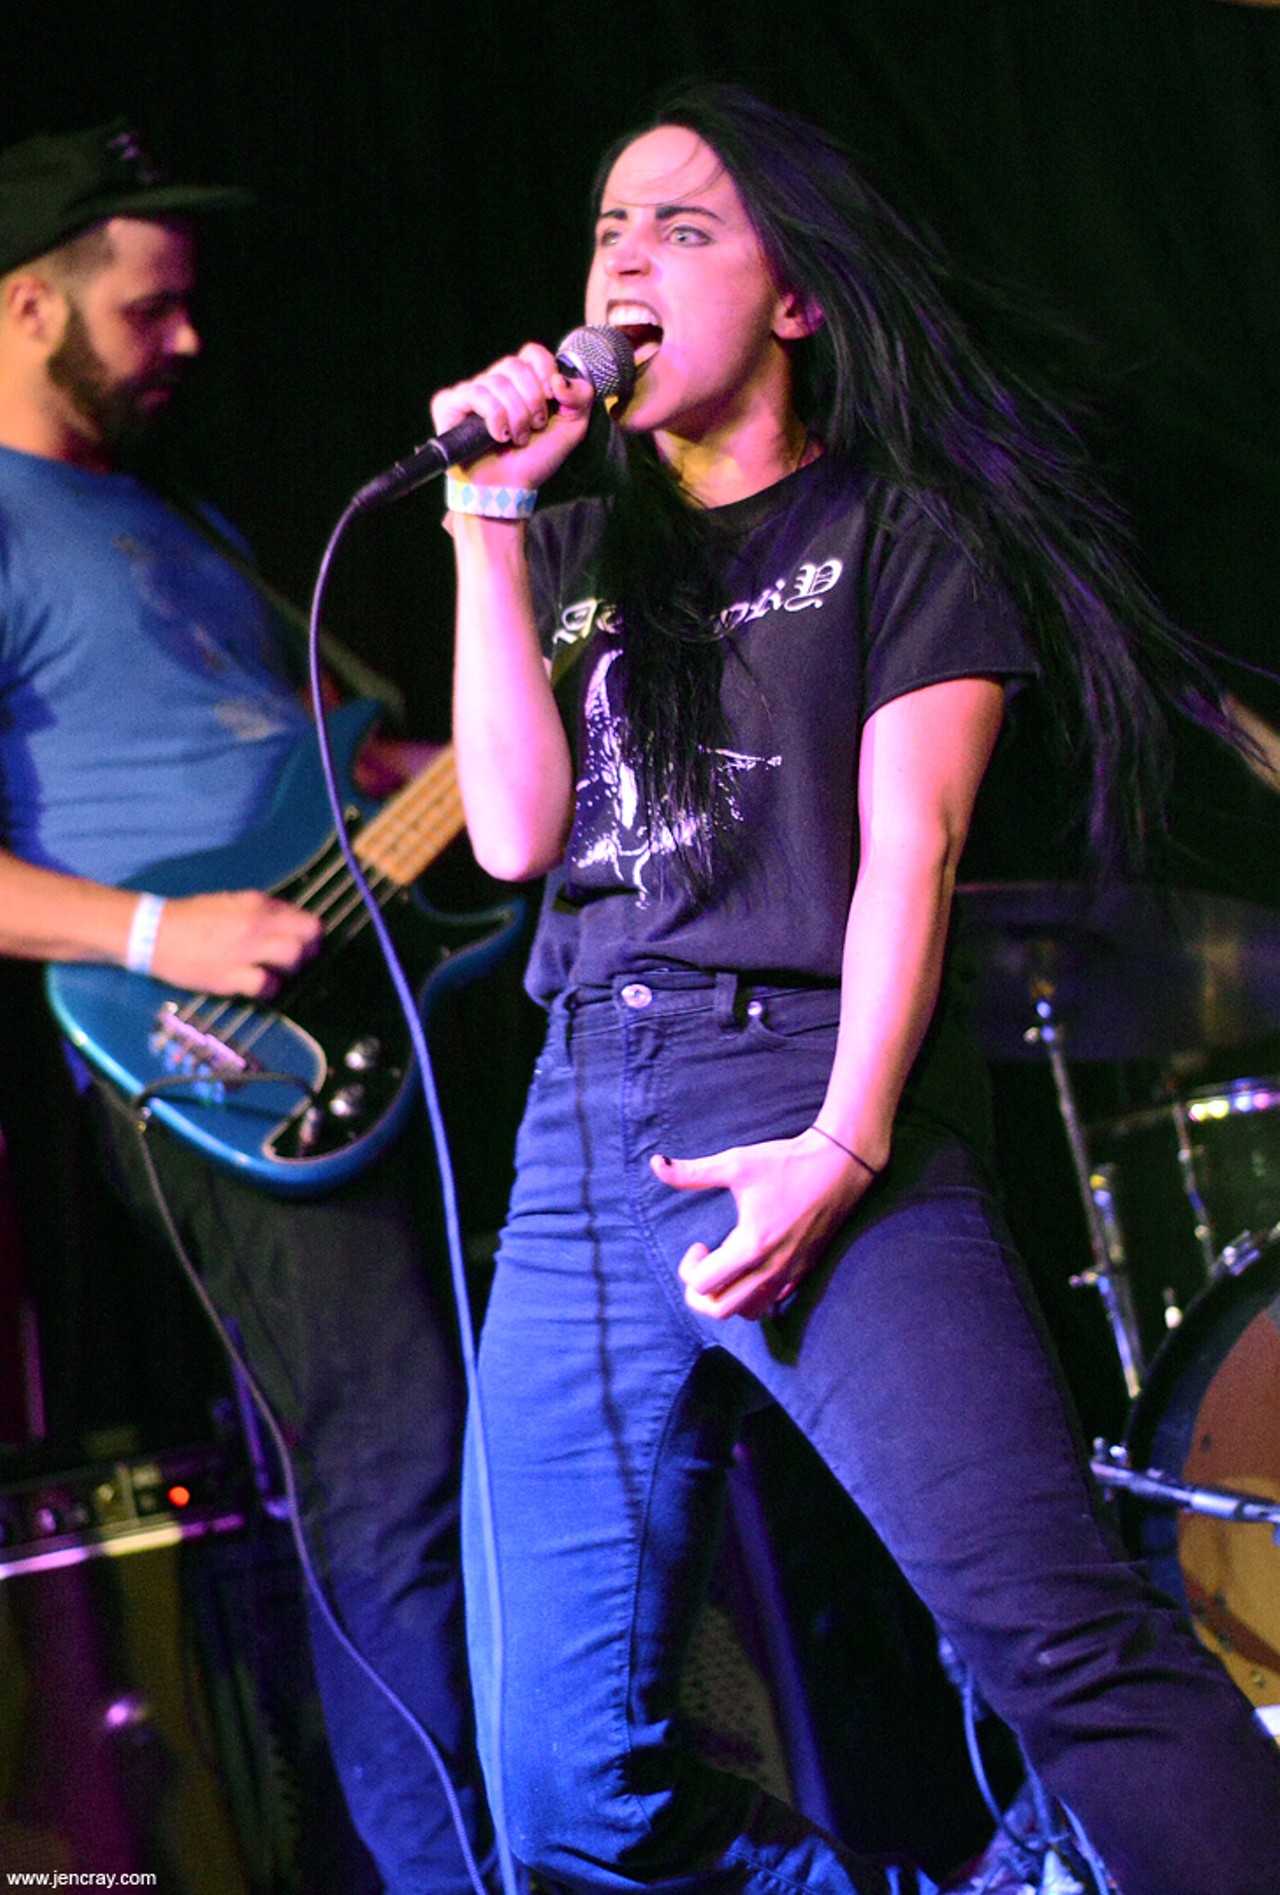 Photos from Autarx and the Palmettes at Will's Pub